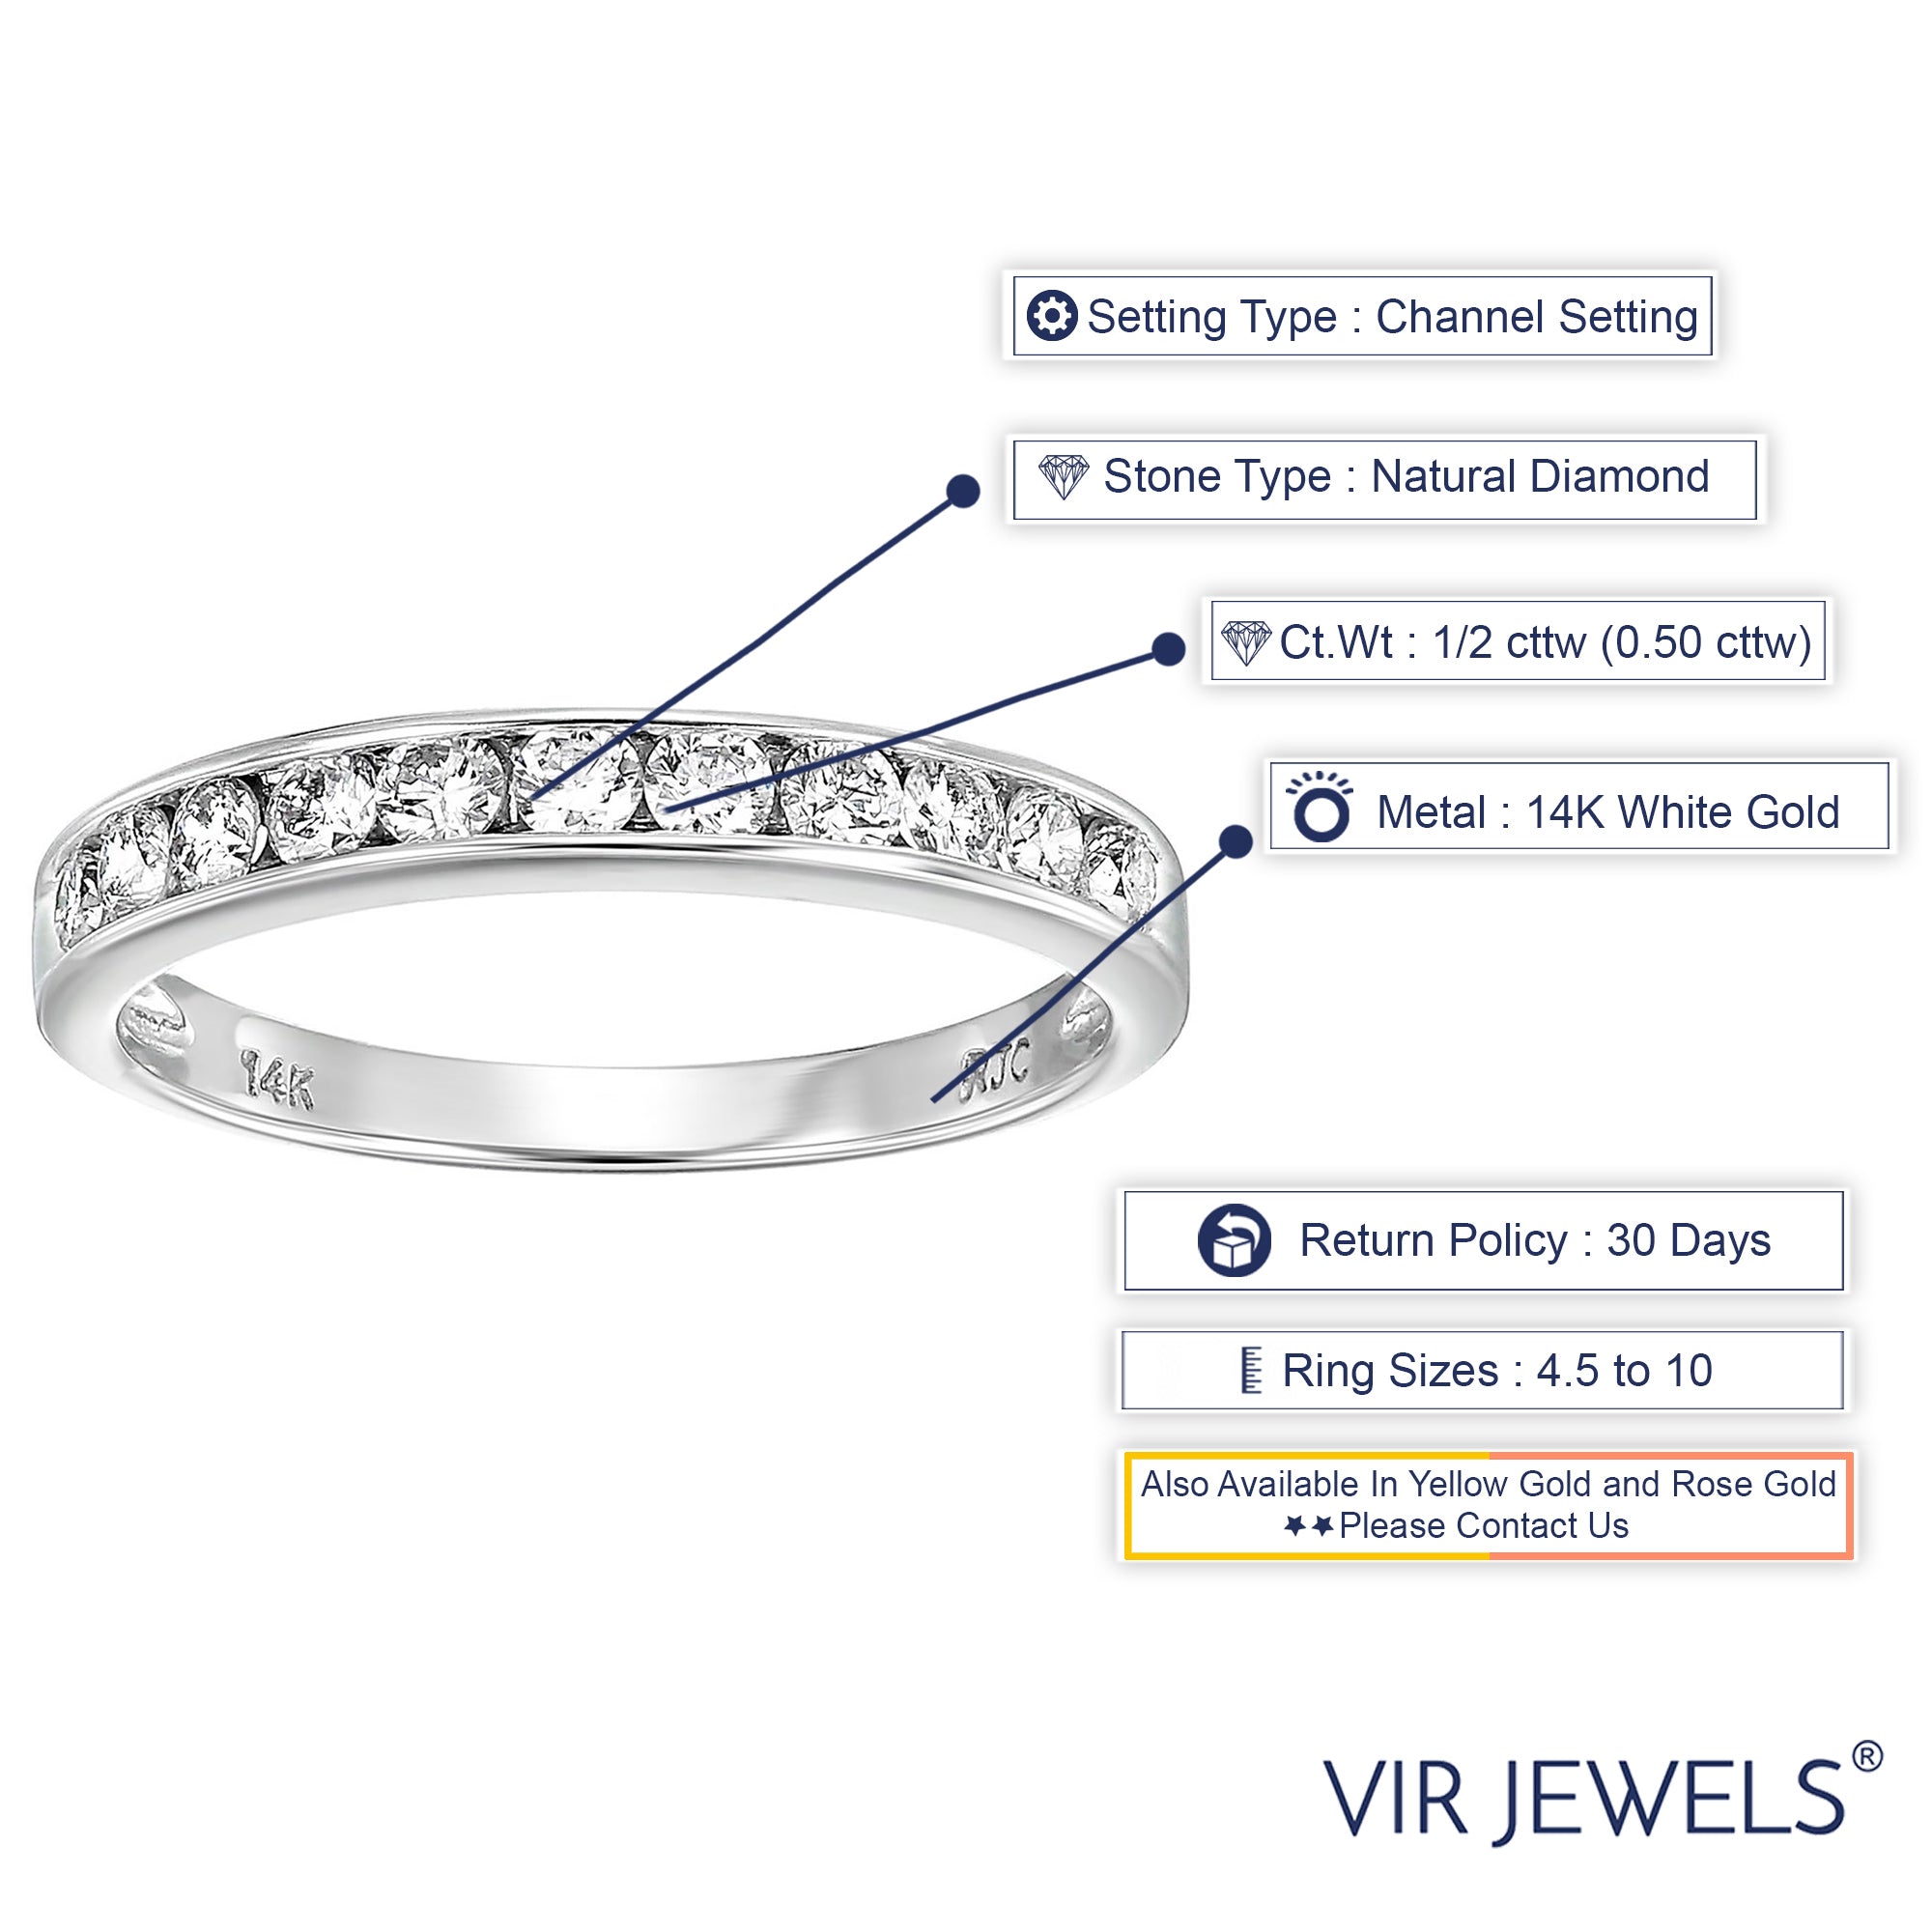 1/2 cttw Diamond Wedding Band for Women, SI2-I1 Certified 14K White Gold Classic Diamond Wedding Band Channel Set, Size 4.5-10